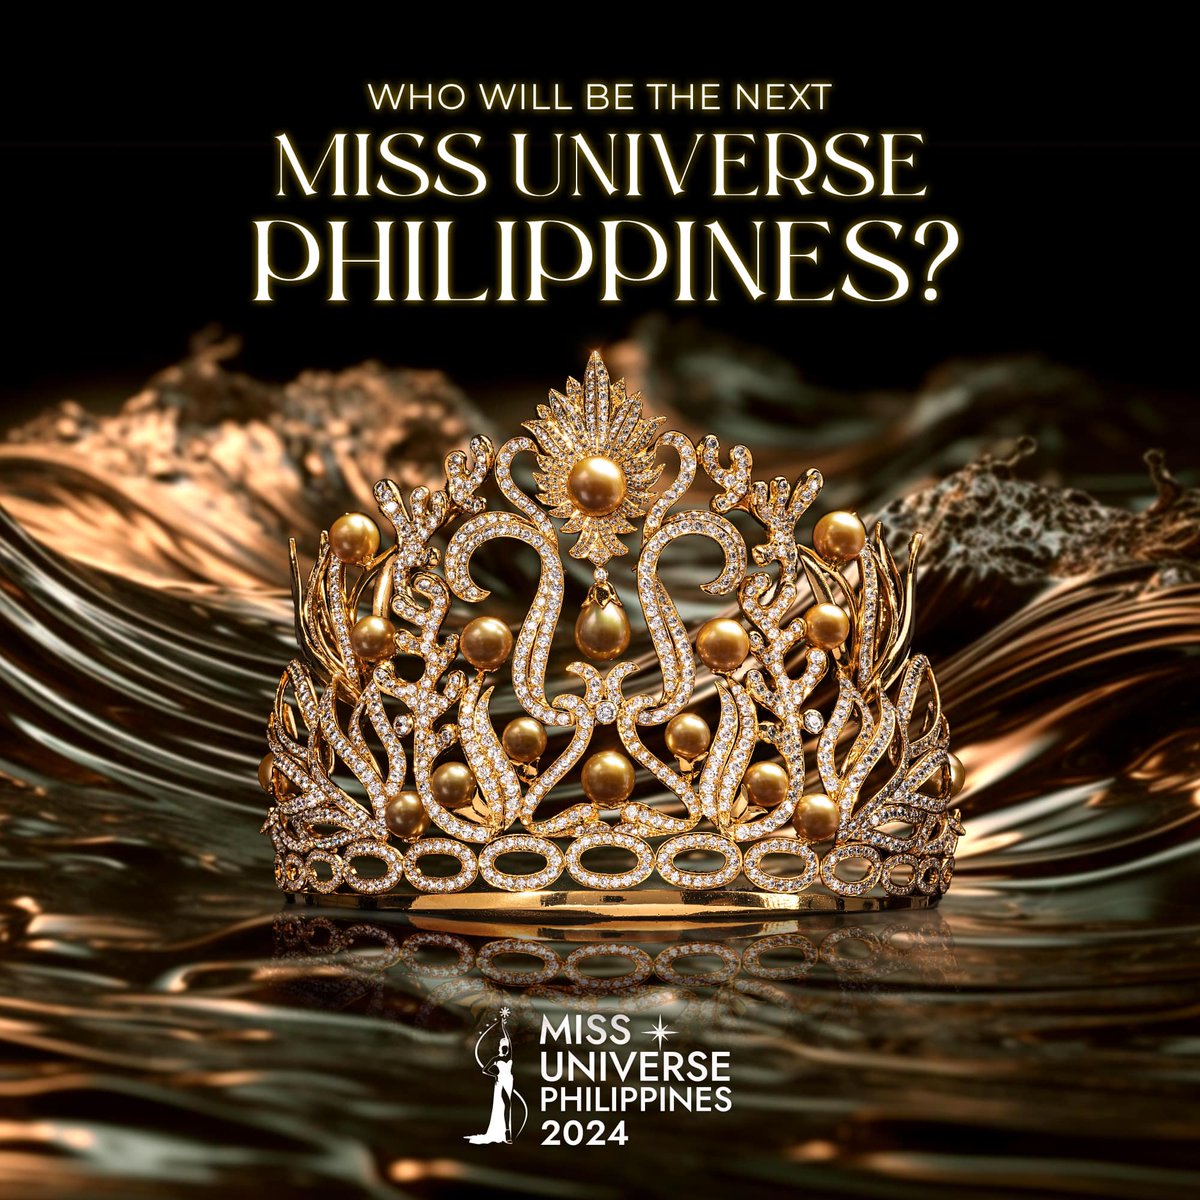 The crowning of the next Miss Universe Philippines happens tomorrow! 🌟 Join us in celebrating beauty and women's empowerment, live at the SM Mall of Asia Arena. 🔗: smtickets.com/events/view/12… #MissUniversePhilippines2024 #MUPH2024AtMOAArena #ChangingTheGameElevatingEntertainment